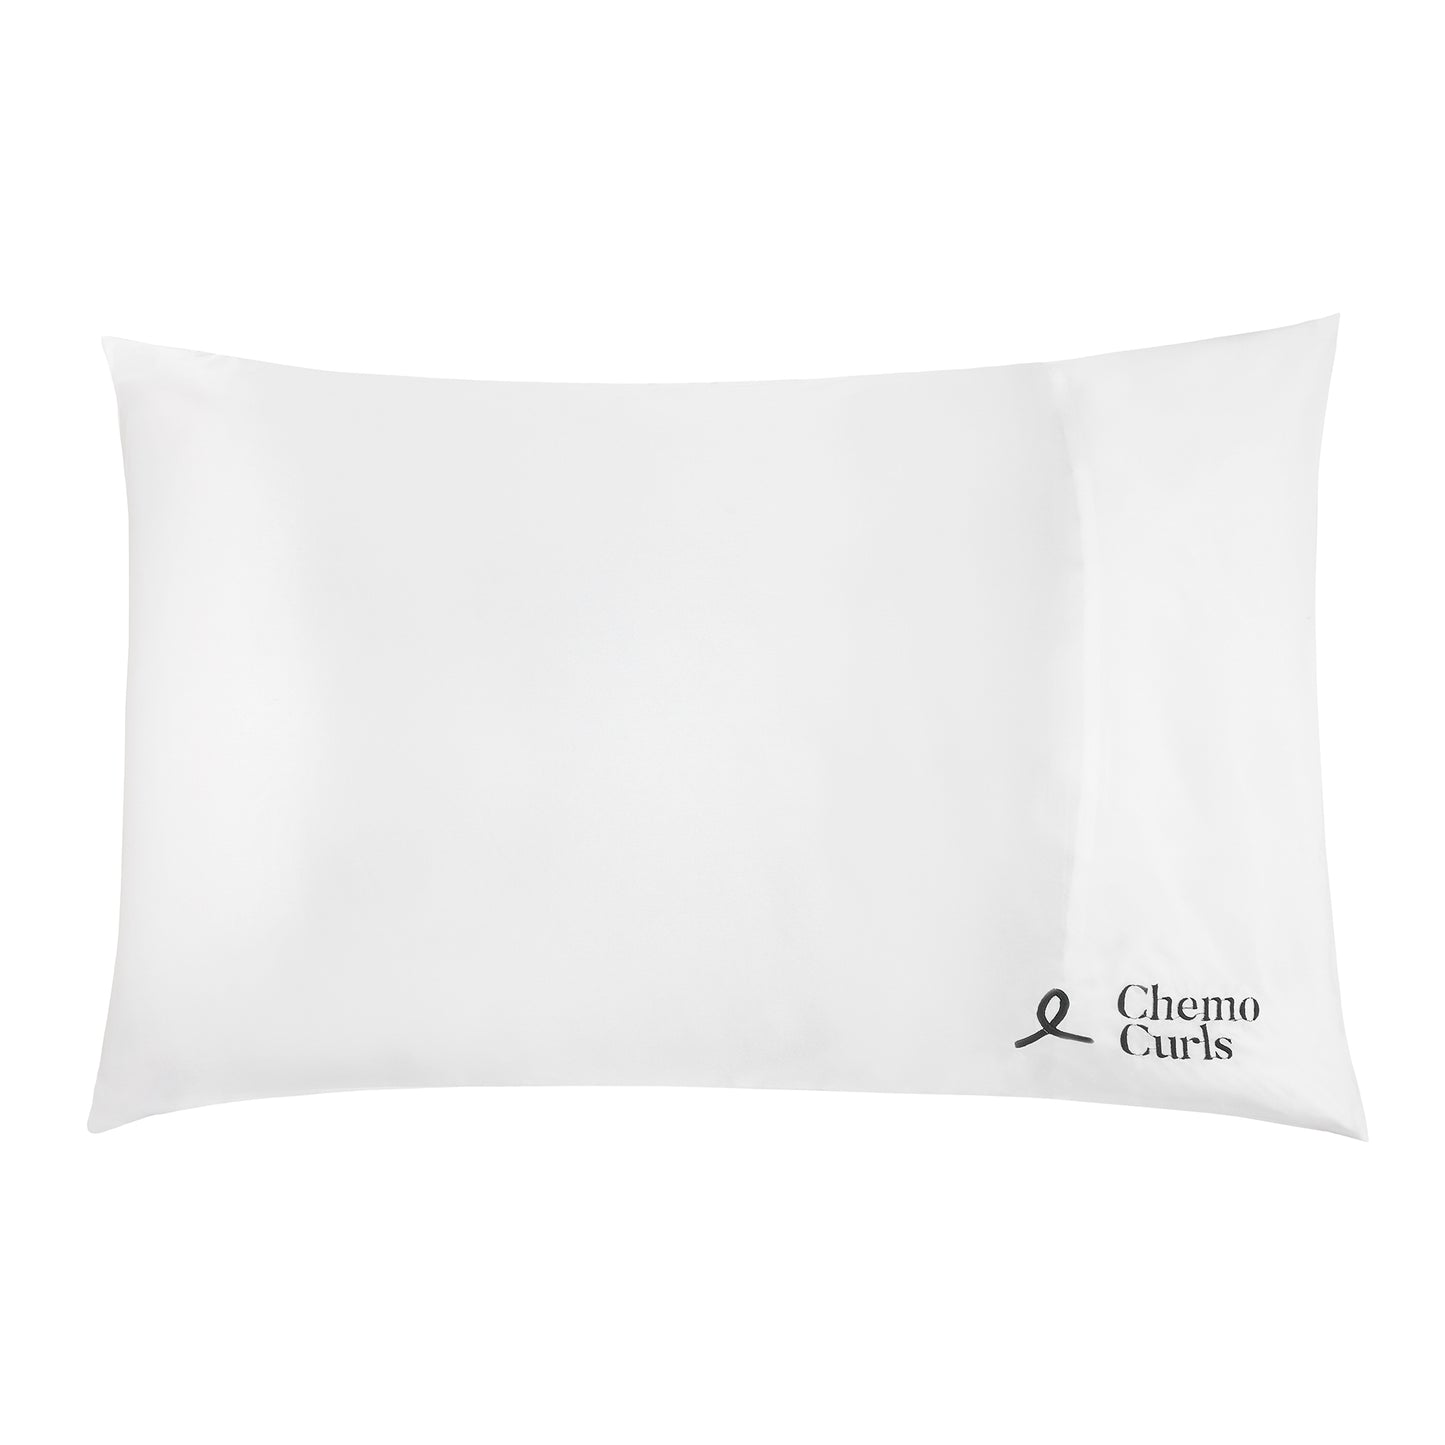 An image of a white satin pillowcase with a sleek and smooth surface. The soft white color of the pillowcase exudes elegance and sophistication. The Chemo Curls logo is skillfully embroidered in black thread on the lower left corner, adding a personalized touch. The satin fabric catches the light, creating a subtle sheen and highlighting the luxurious texture. This image portrays a sense of comfort, style, and attention to detail